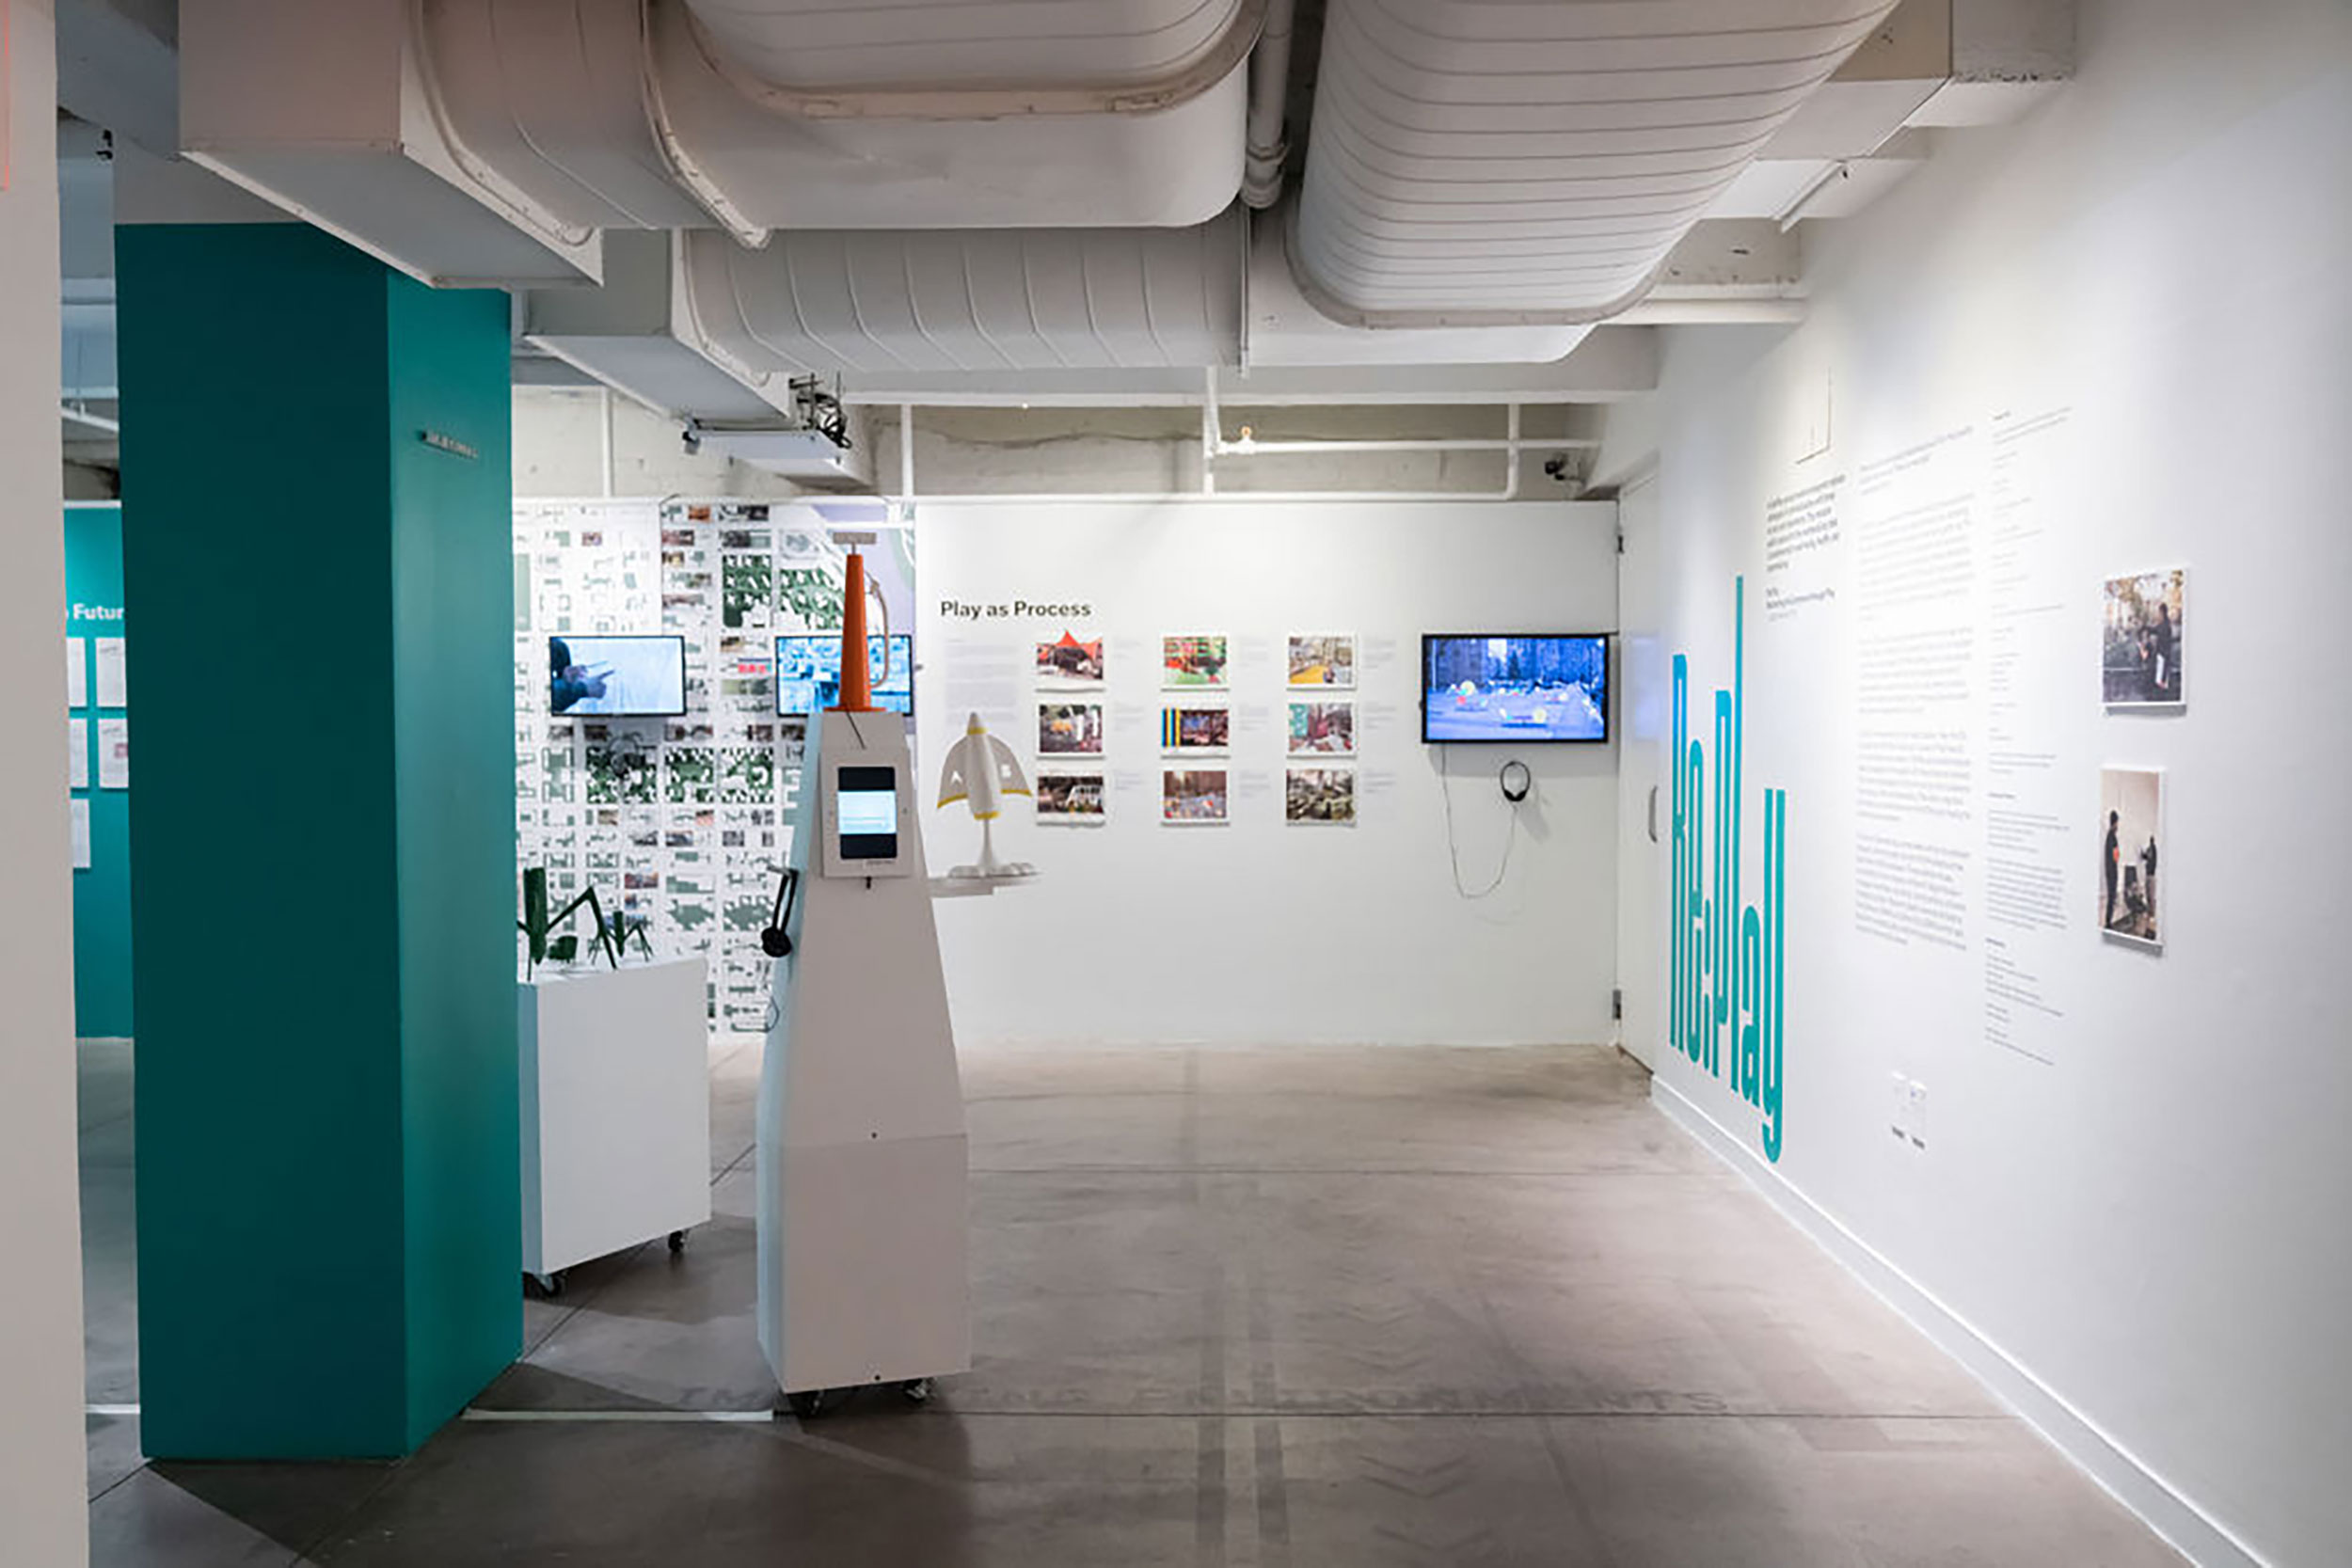 Installation view of a gallery room with white walls lined with text and TVS, blue details, and a free standing structure in the middle.